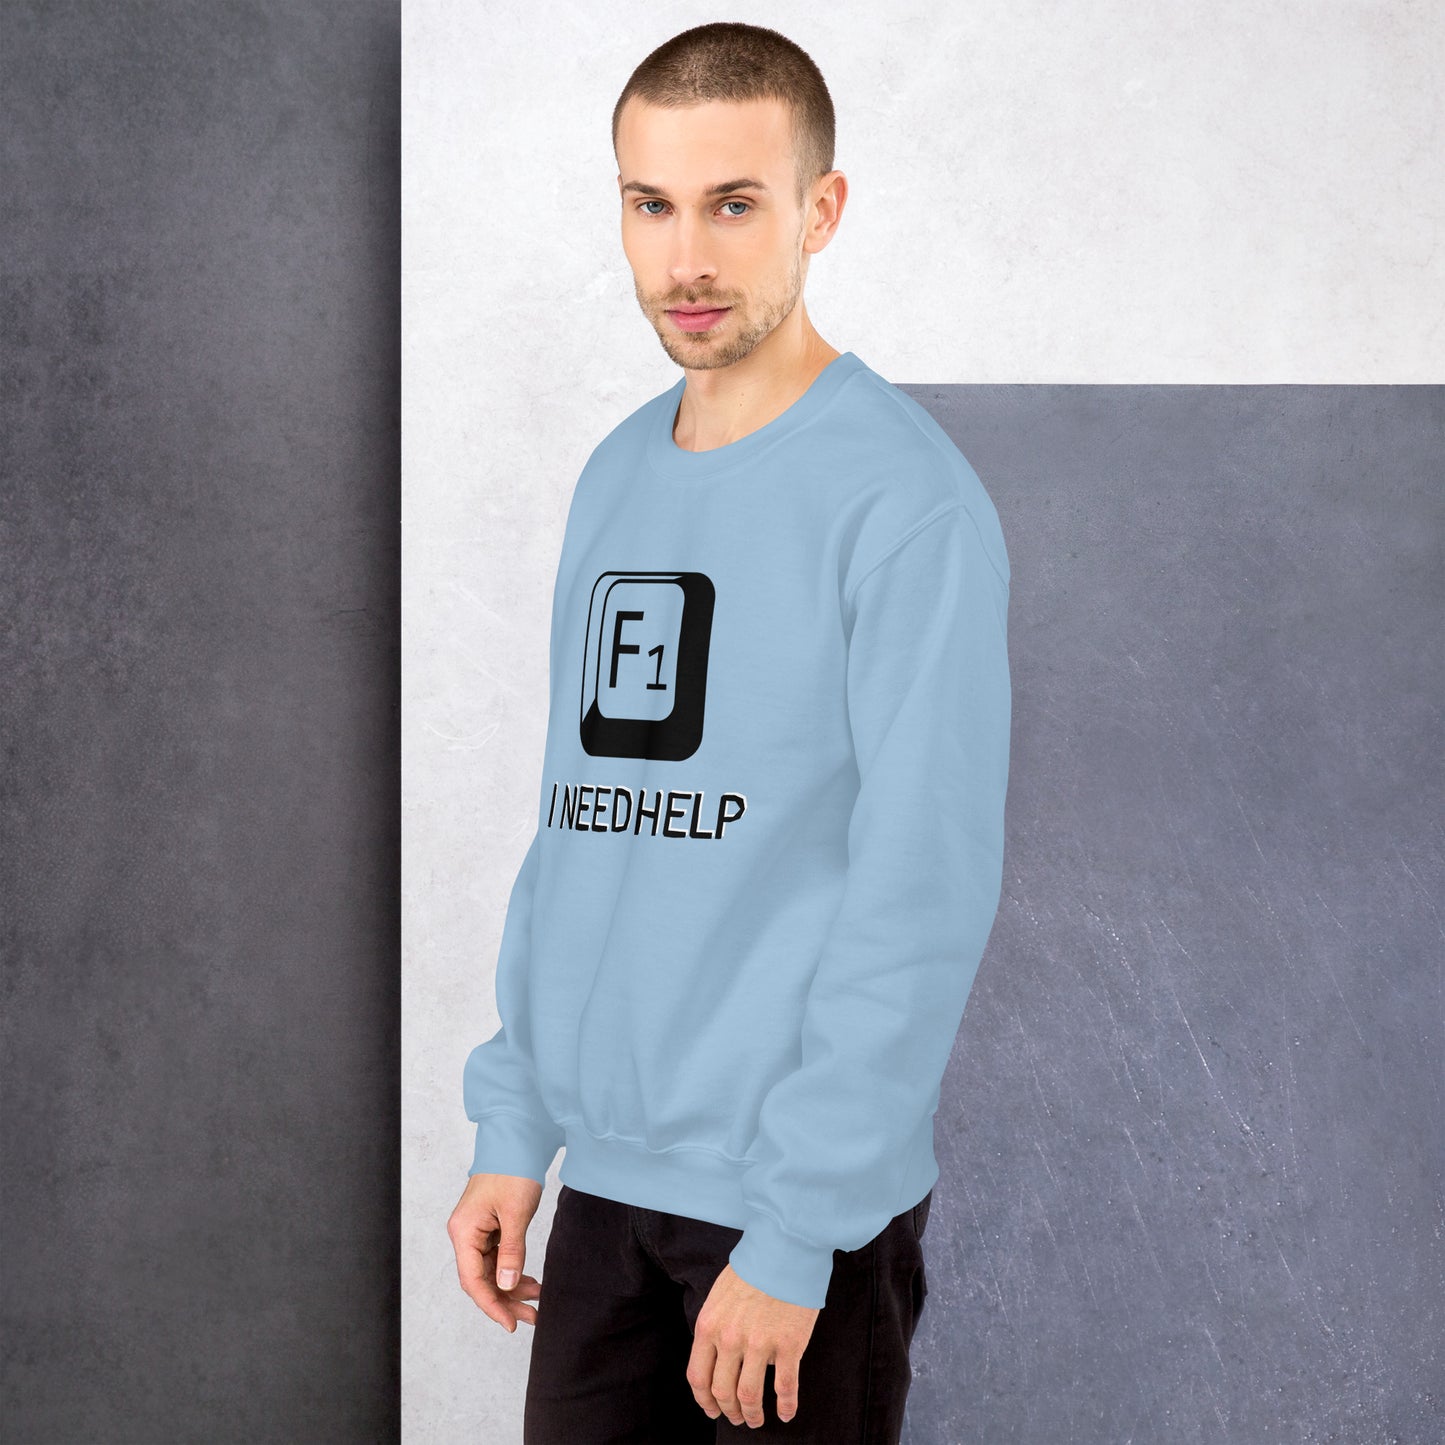 Men with light blue sweatshirt and a picture of F1 key with text "I need help"